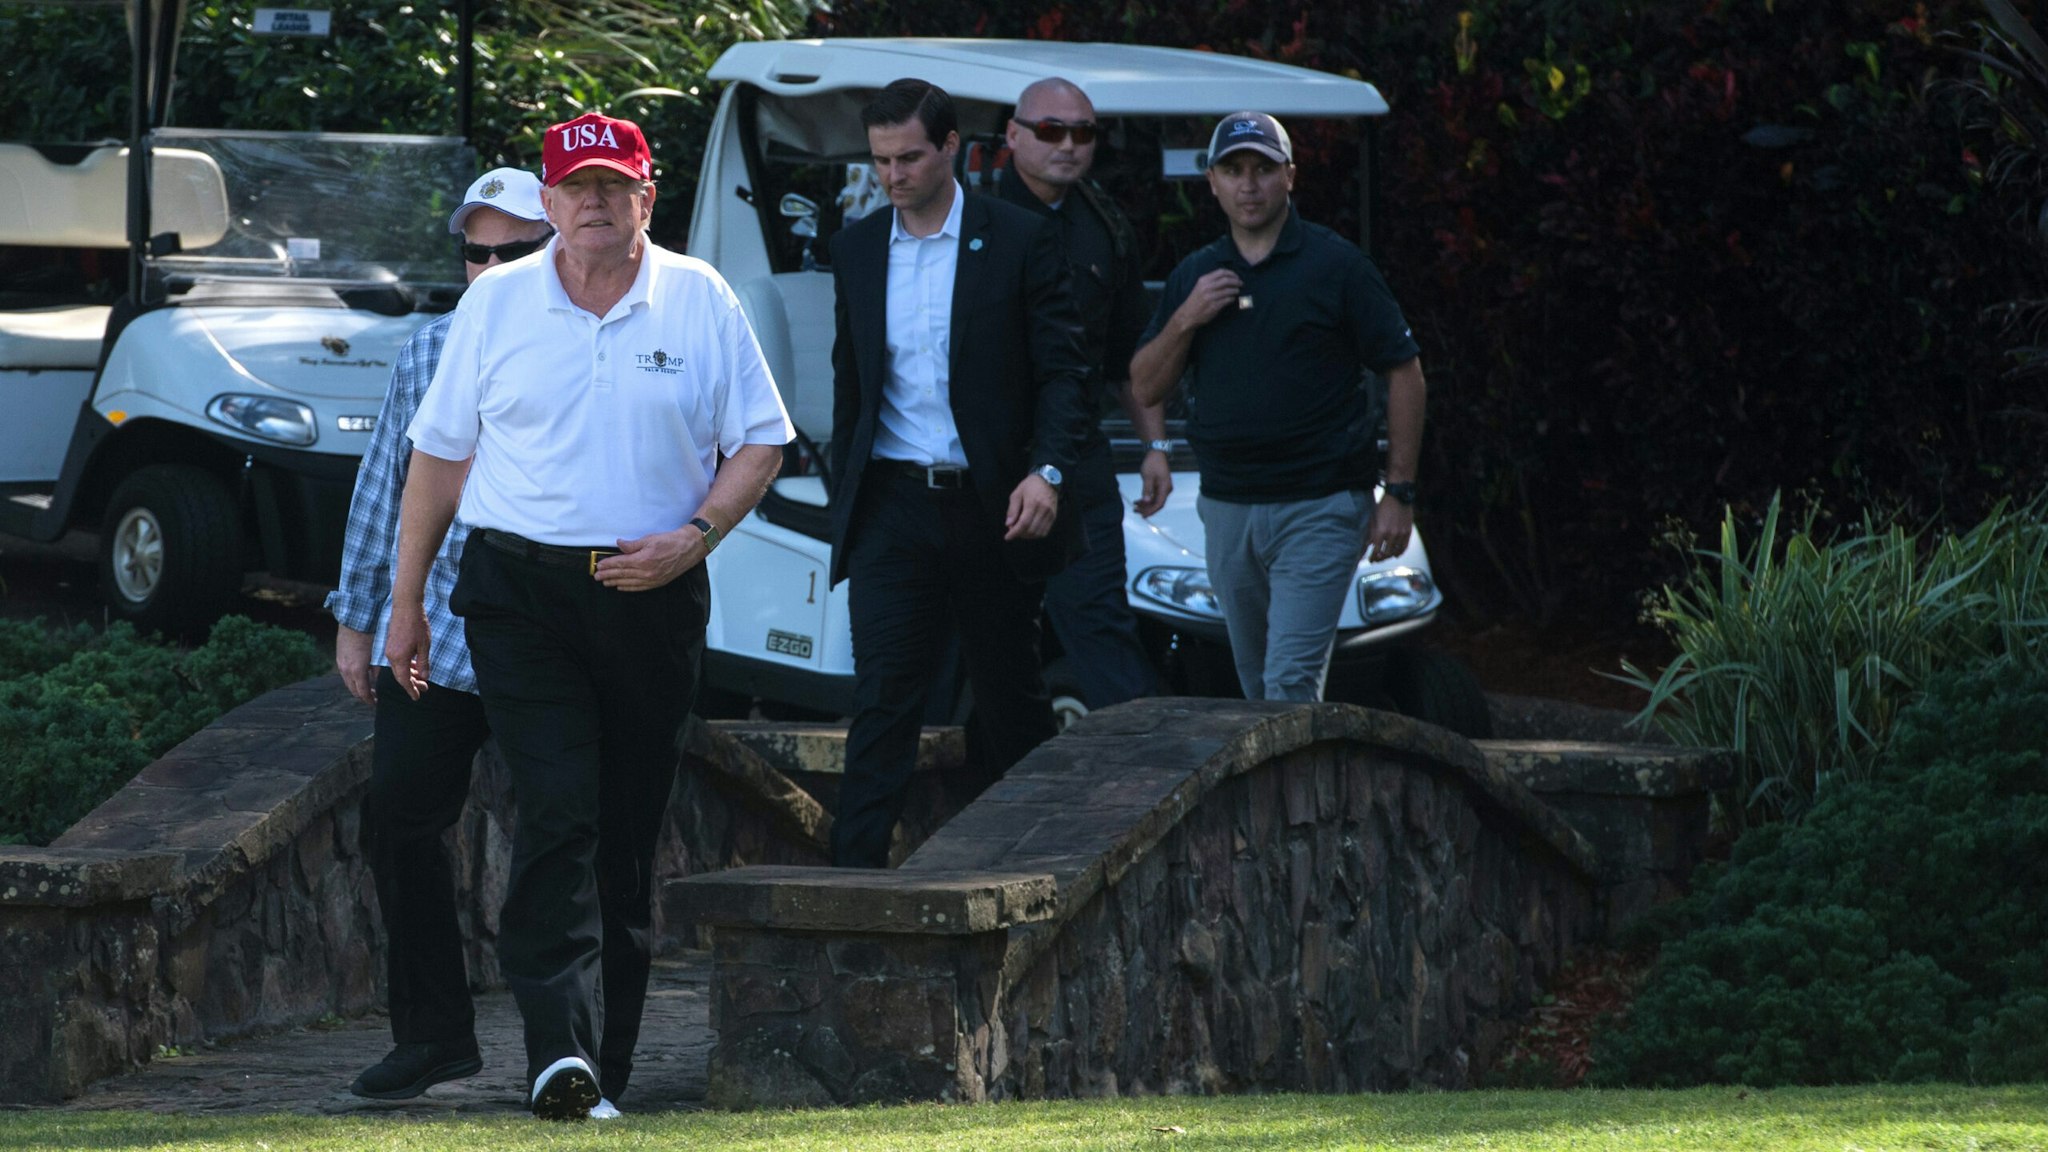 US President Donald Trump walks onto the green at the Trump International Golf Course in Mar-a-Lago, Florida during an invitation for United States Coast Guard service members to play golf on December 29, 2017. The President invited members of the Coast Guard to play golf to thank them personally for their service of patrolling the waters near Palm Beach and Mar-a-Lago.